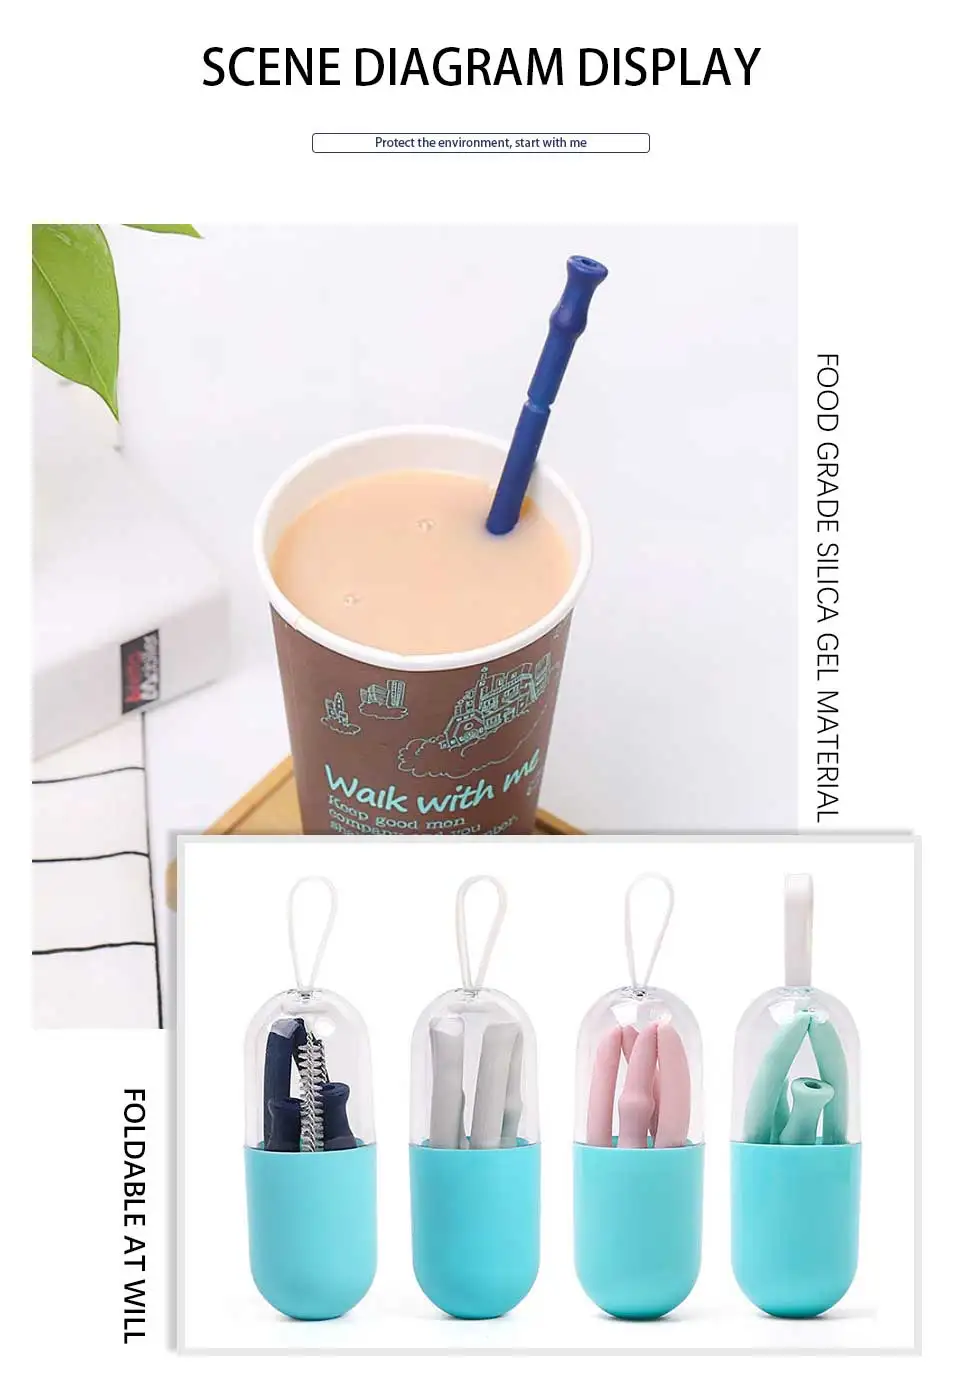 Collapsible Reusable Straw Foldable Silicone Straw Drinking Straws With Cleaning Brush Set for Travel Home Office Bar Drinks